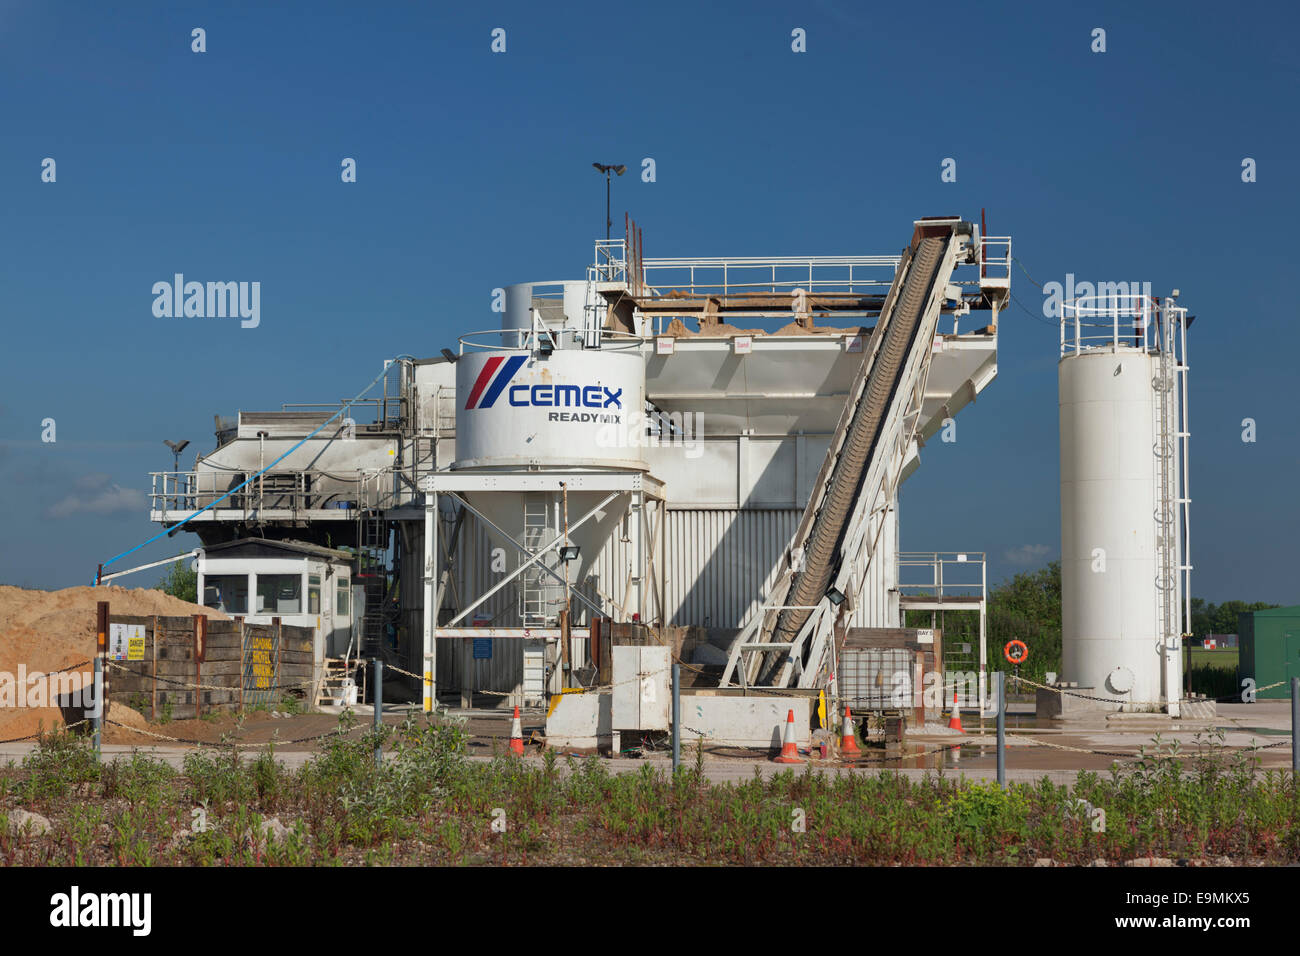 Cemex Readymix cement plant at Stansted Airport Stock Photo